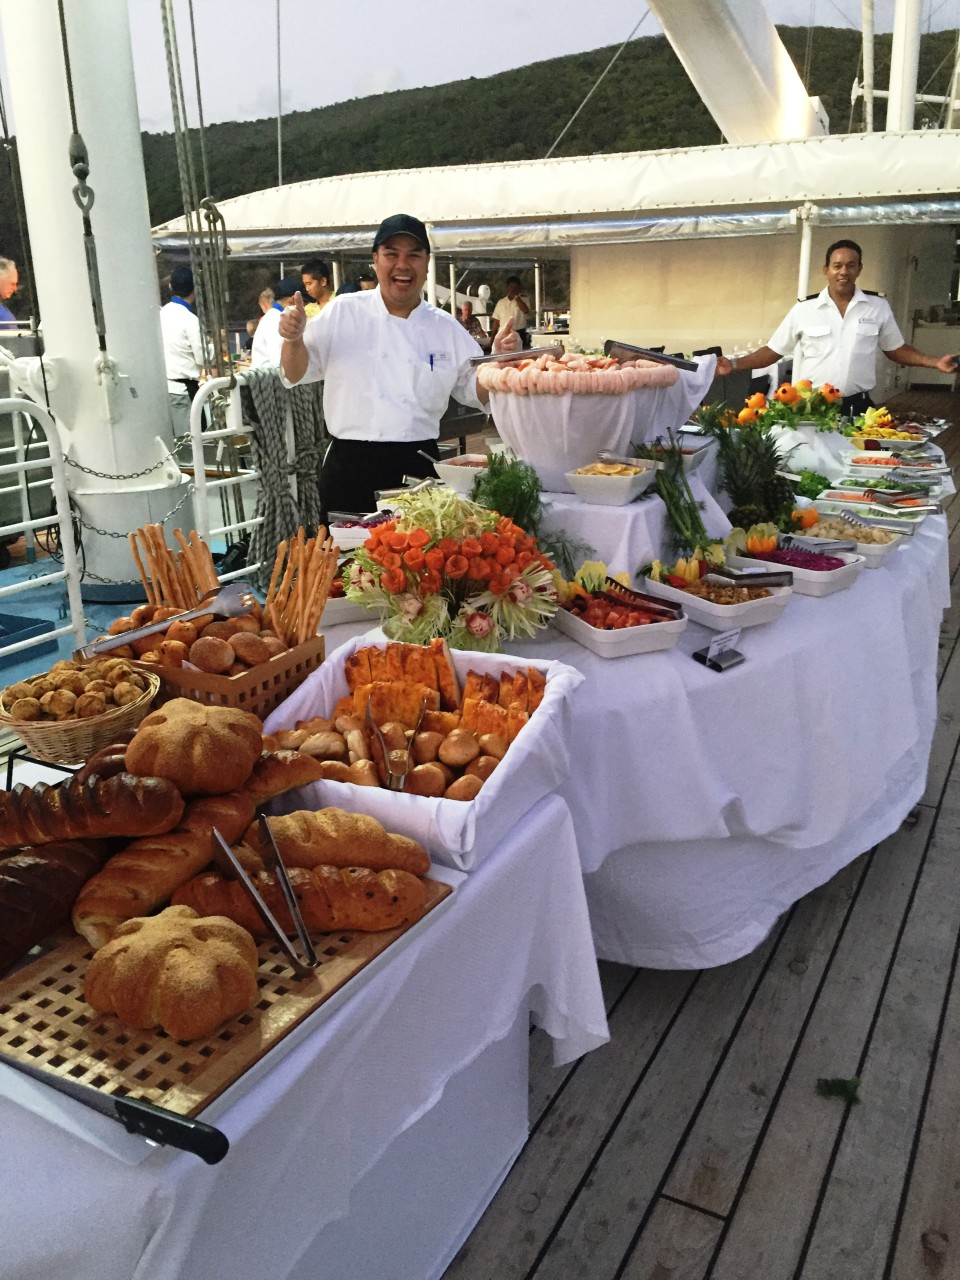 Dining under the stars with Windstar Cruises !